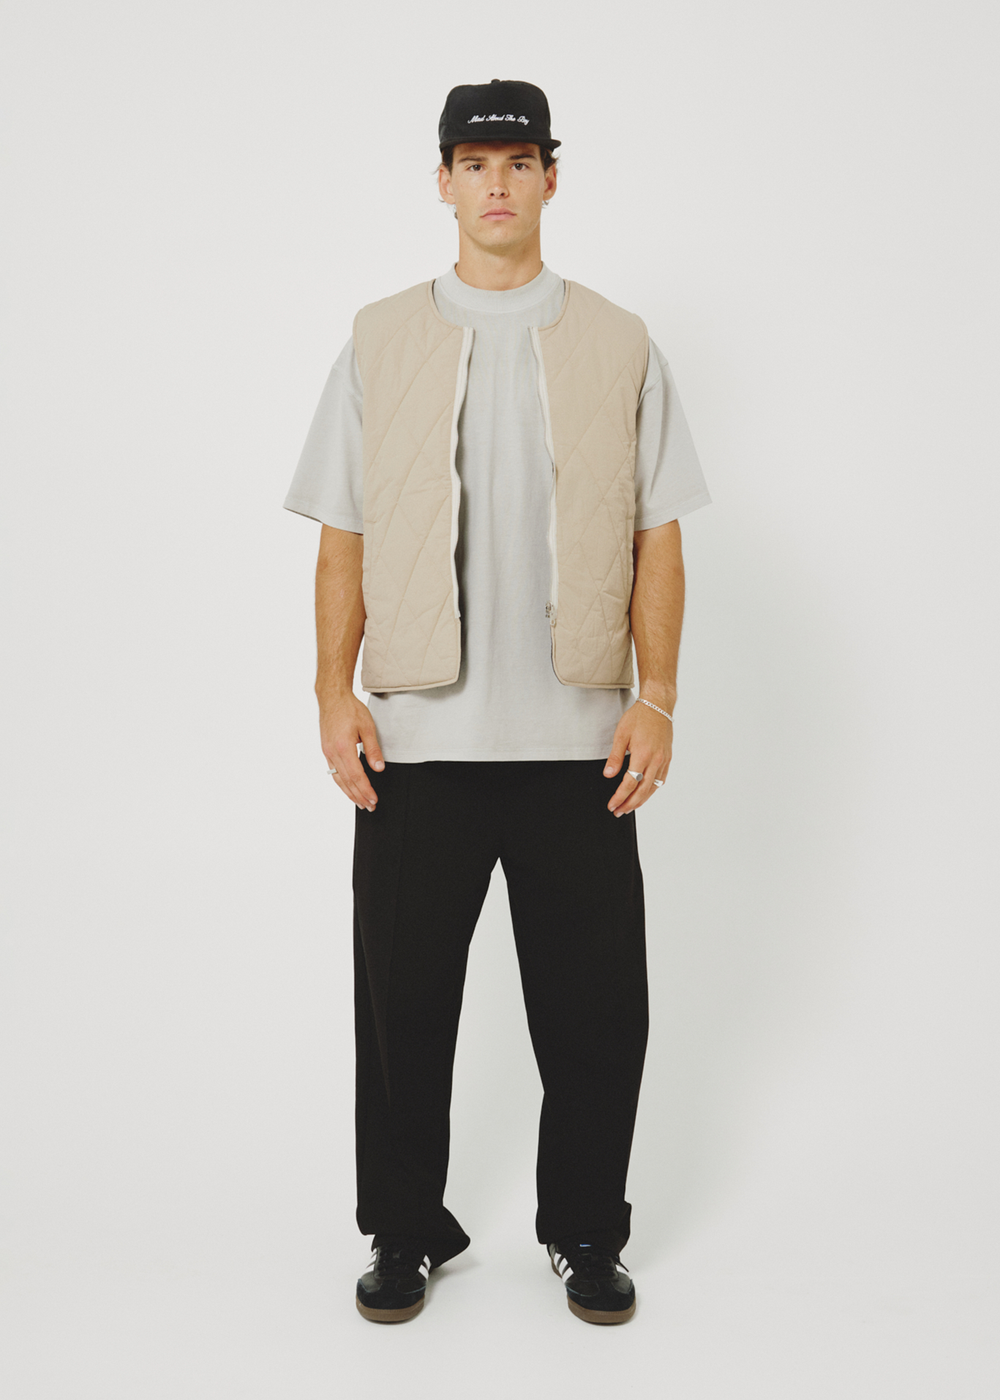 TWO-WAY QUILTED VEST - TAN / BLACK | COMMONERS | Mad About The Boy